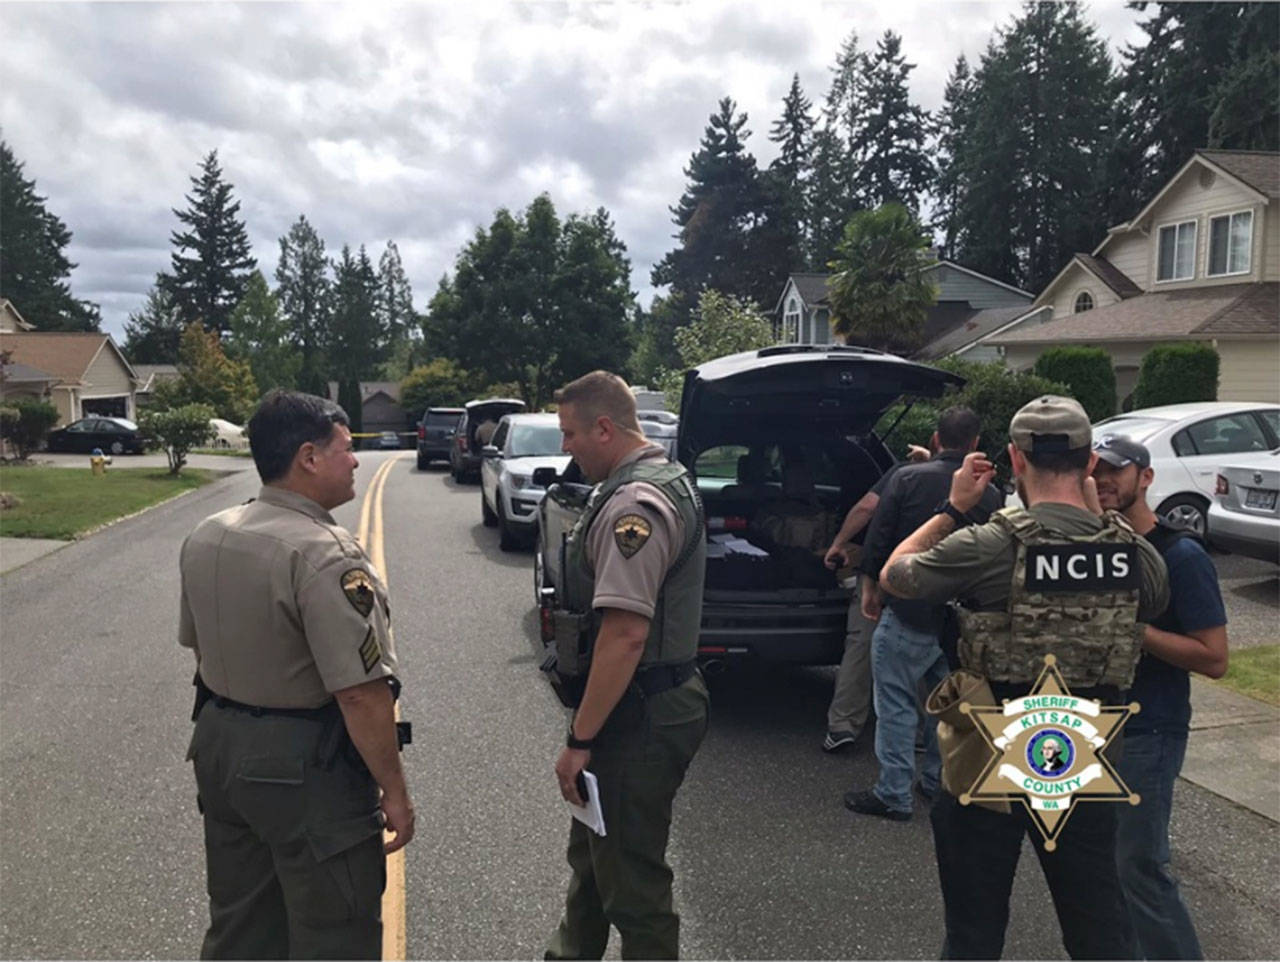 Neighbors evacuated after explosives found in Silverdale home